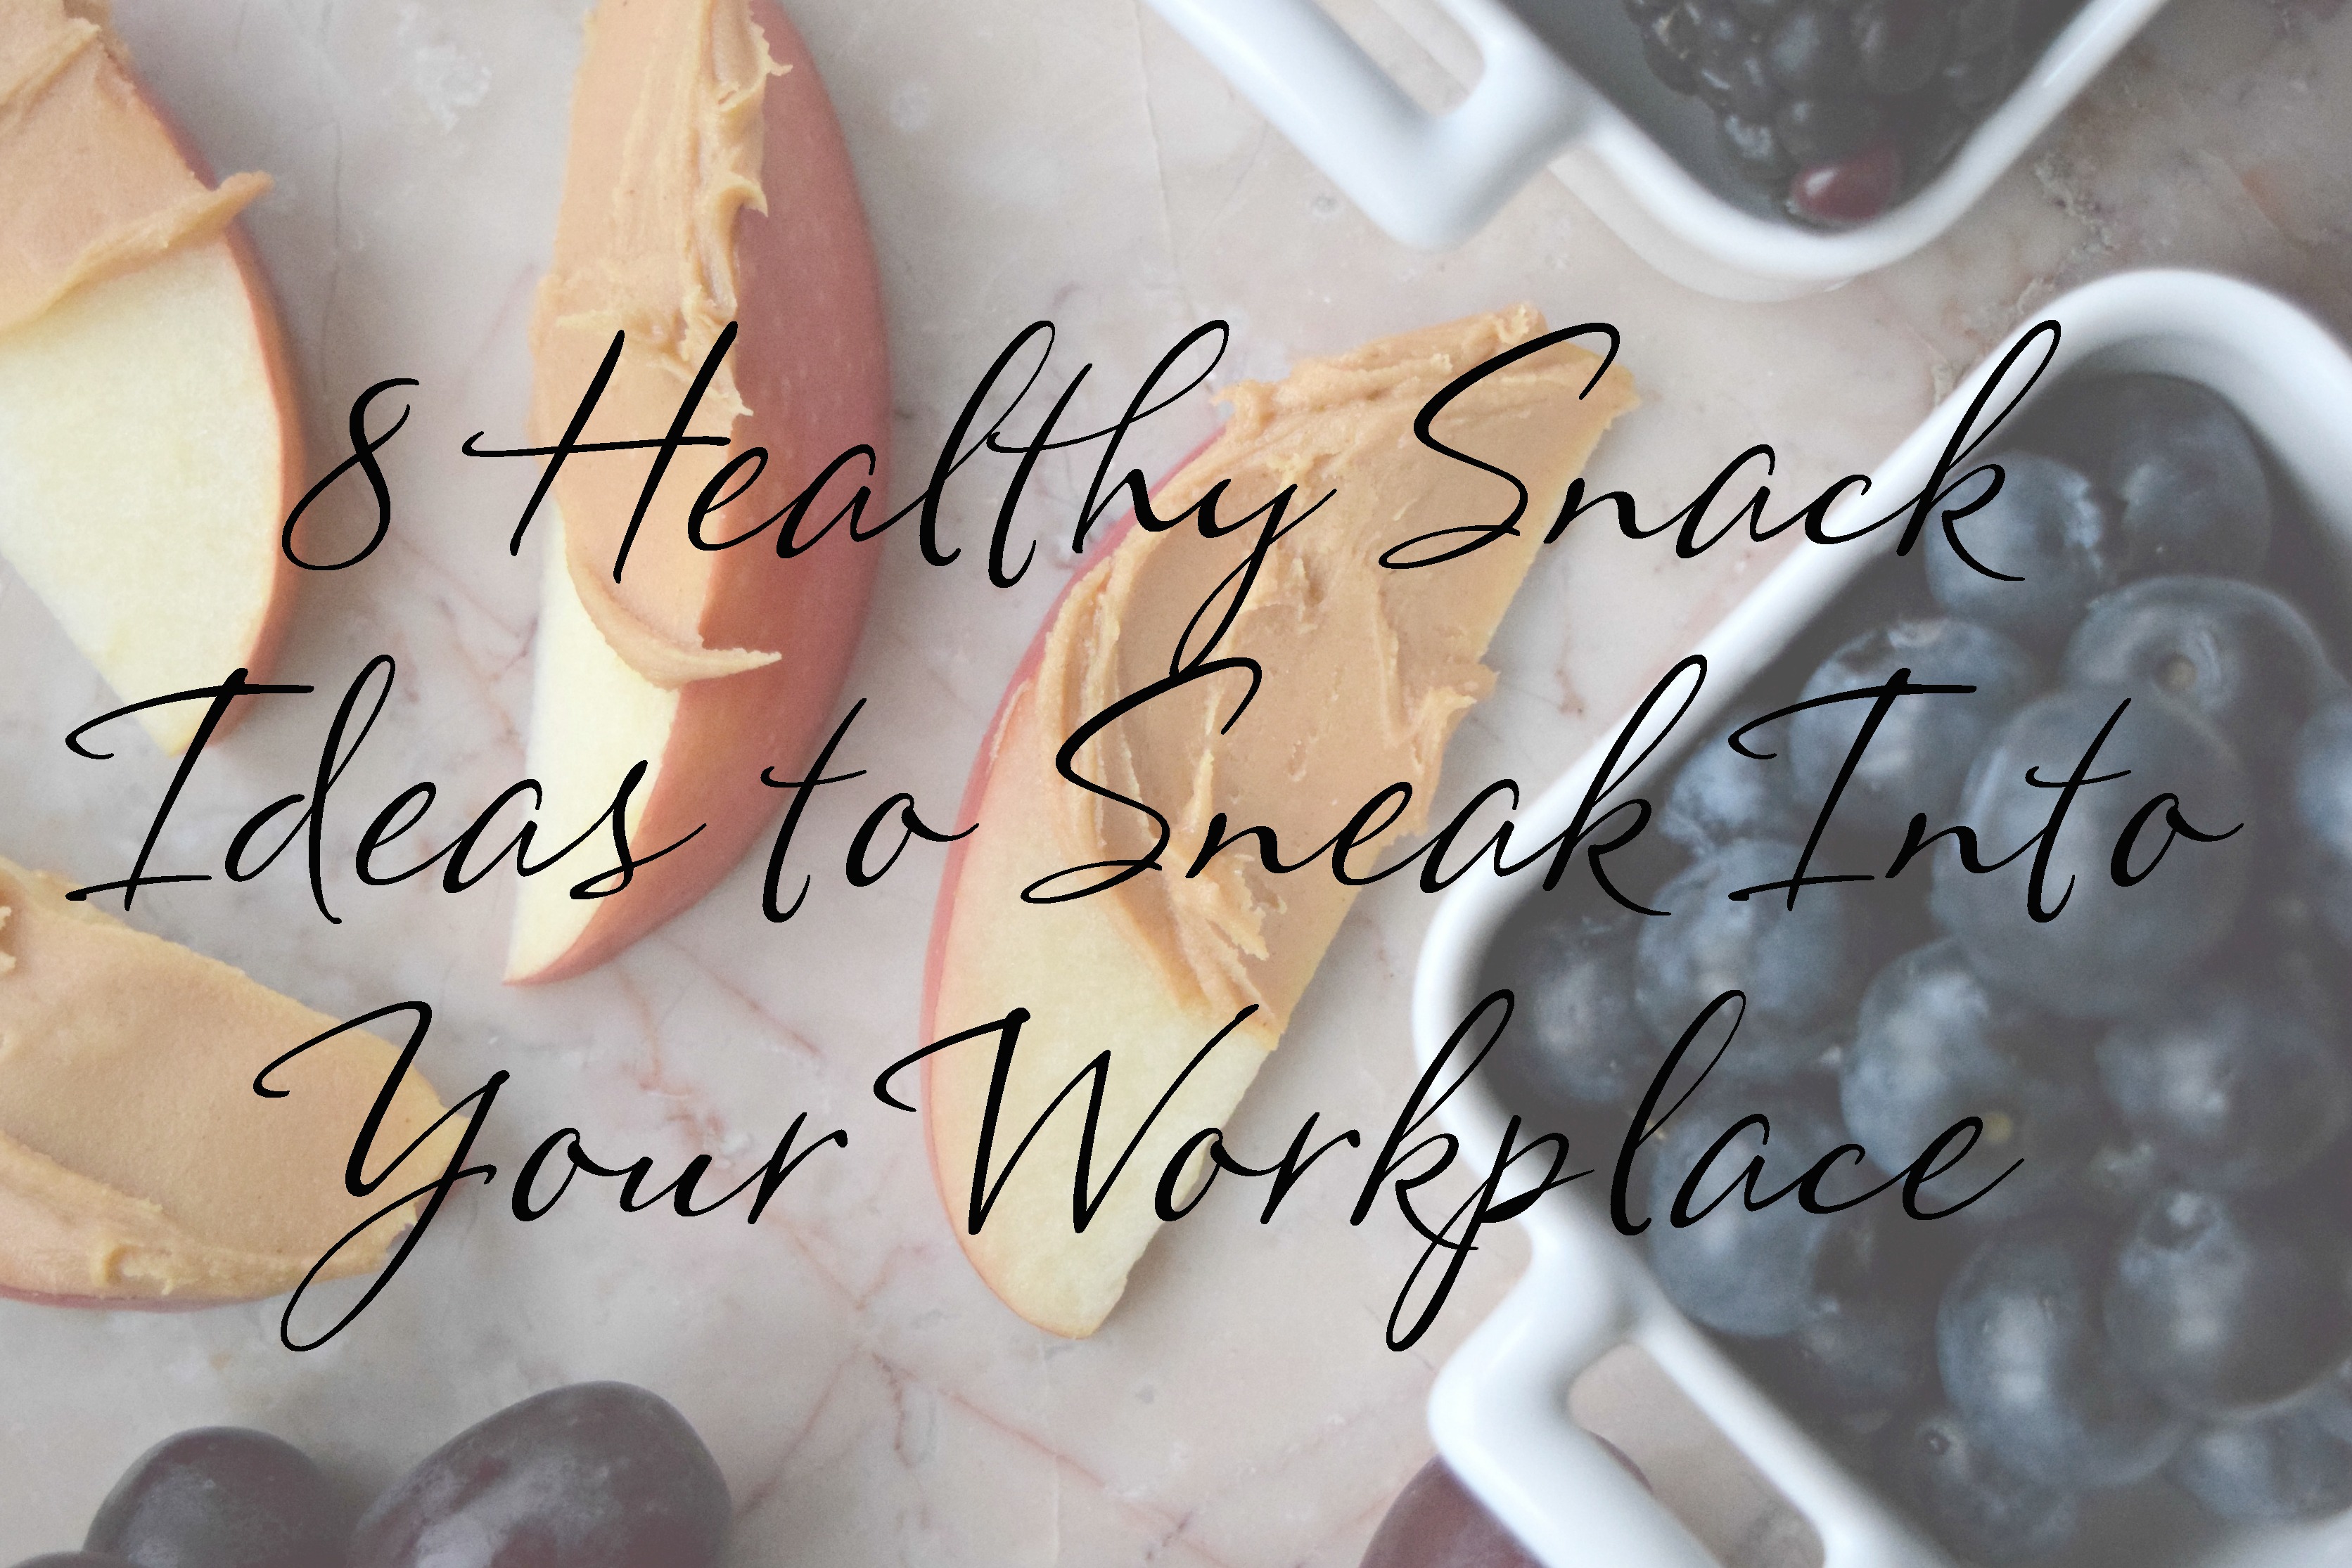 Living the Gourmet: 8 Healthy Snack Ideas to Sneak Into Your Workplace